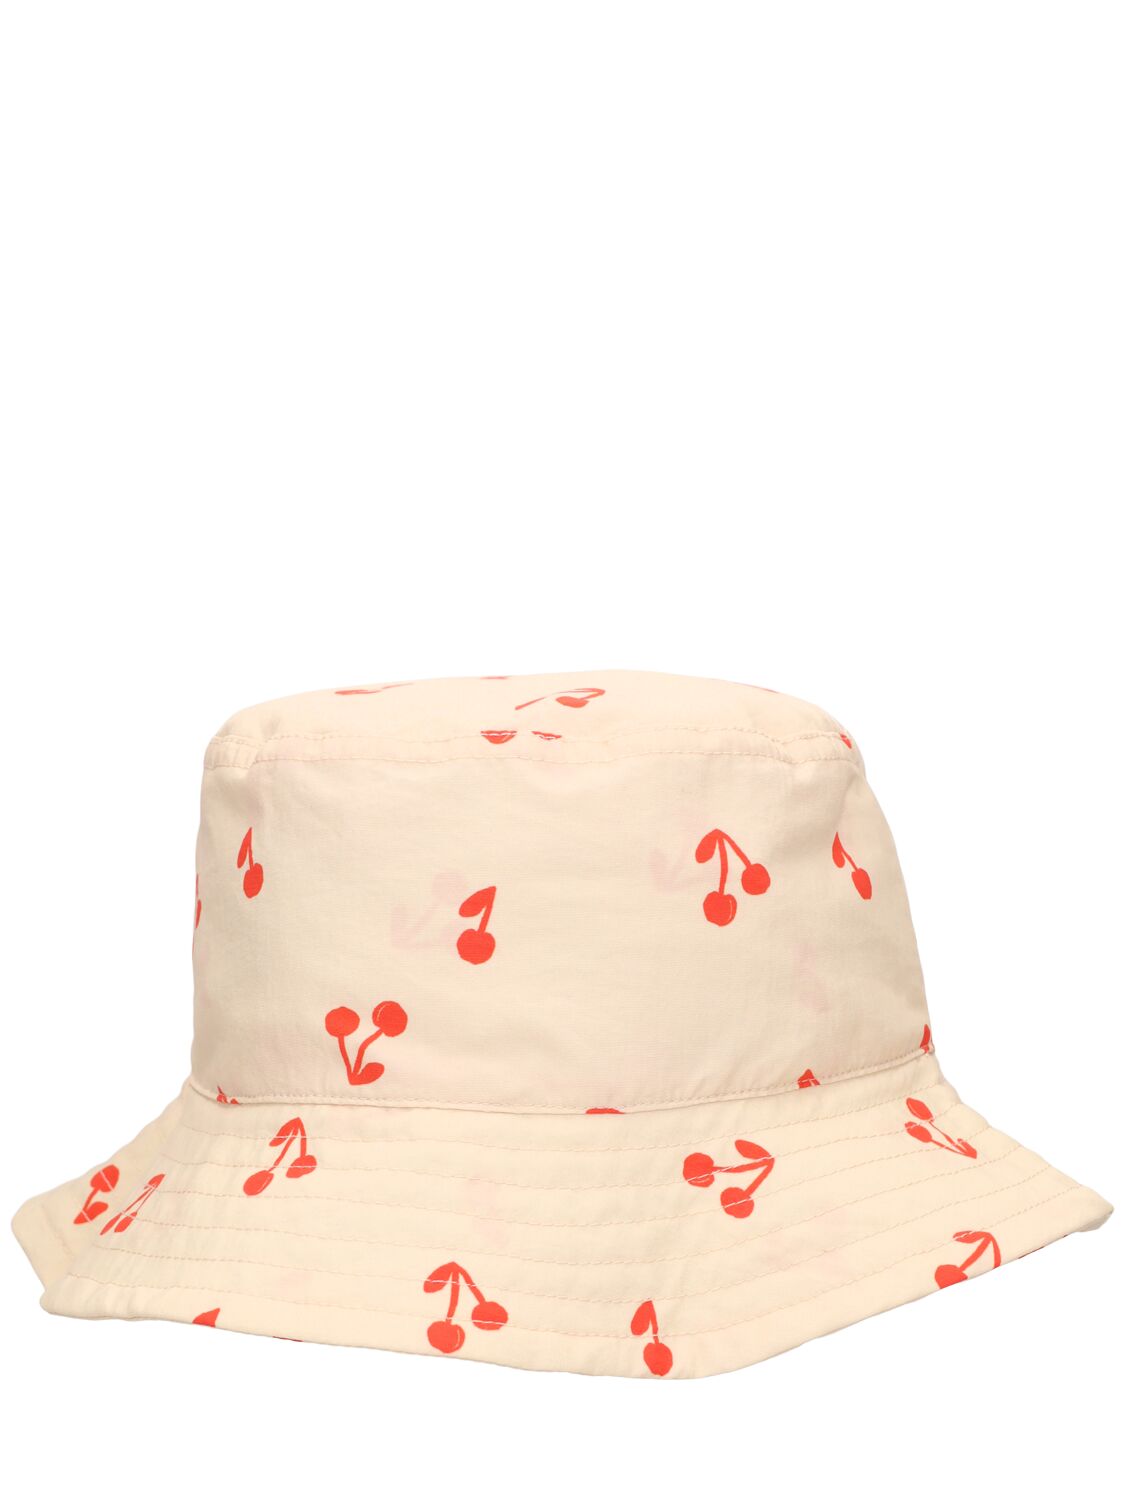 Liewood Kids' Cherry Print Recycled Nylon Bucket Hat In Neutral